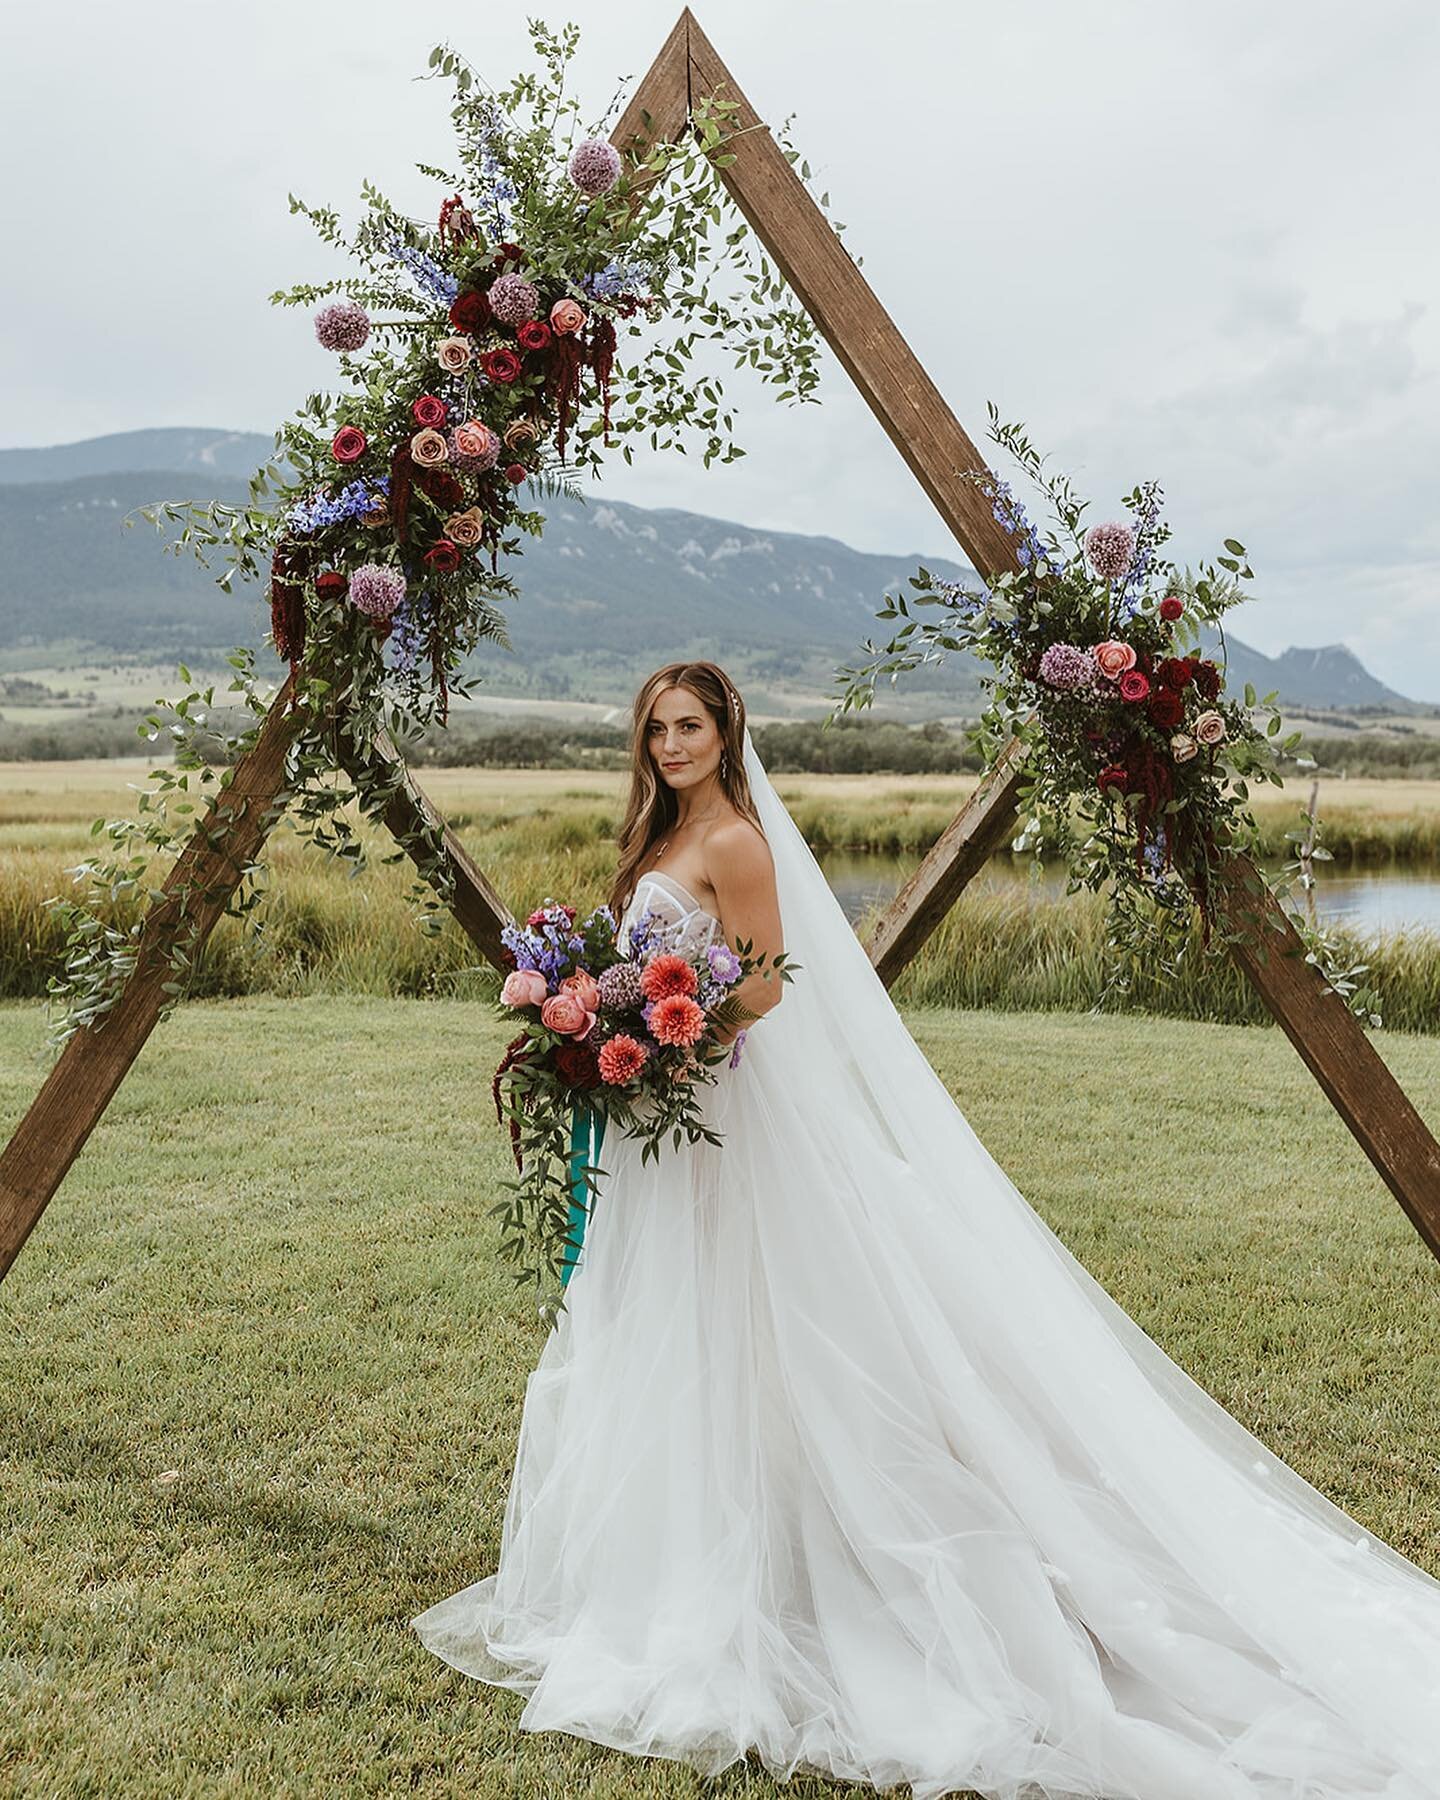 This wedding was one for the books. Not only did the bride make her own wedding dress, but also choreographed a first dance with her mom!  Talk about celebrating. 
.
We had such a great time meeting and executing the florals for this summer Red Lodge